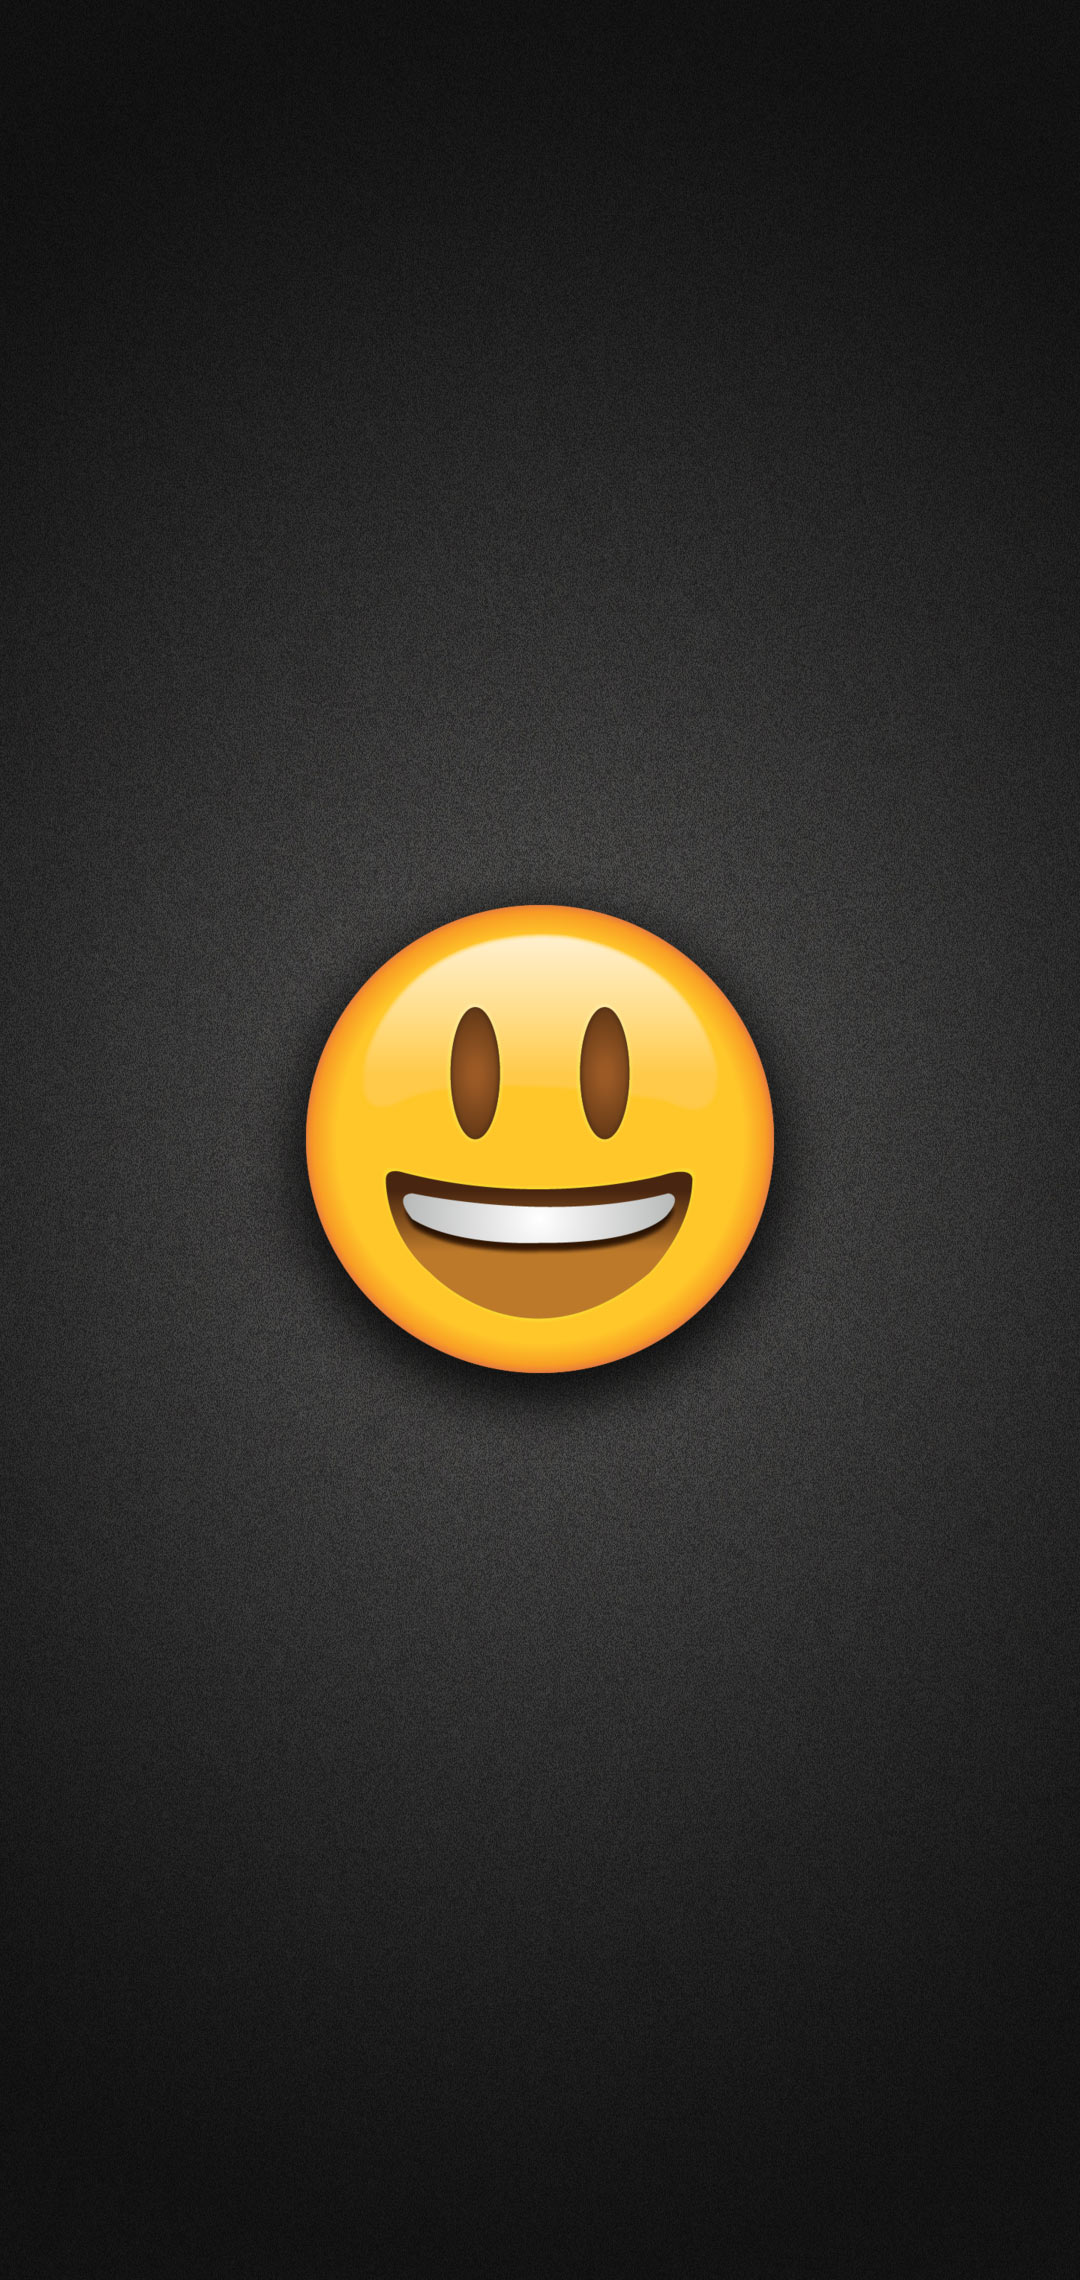 Smiling Emoji With Eyes Opened Phone – Wallpaper - Chill-out Wallpapers